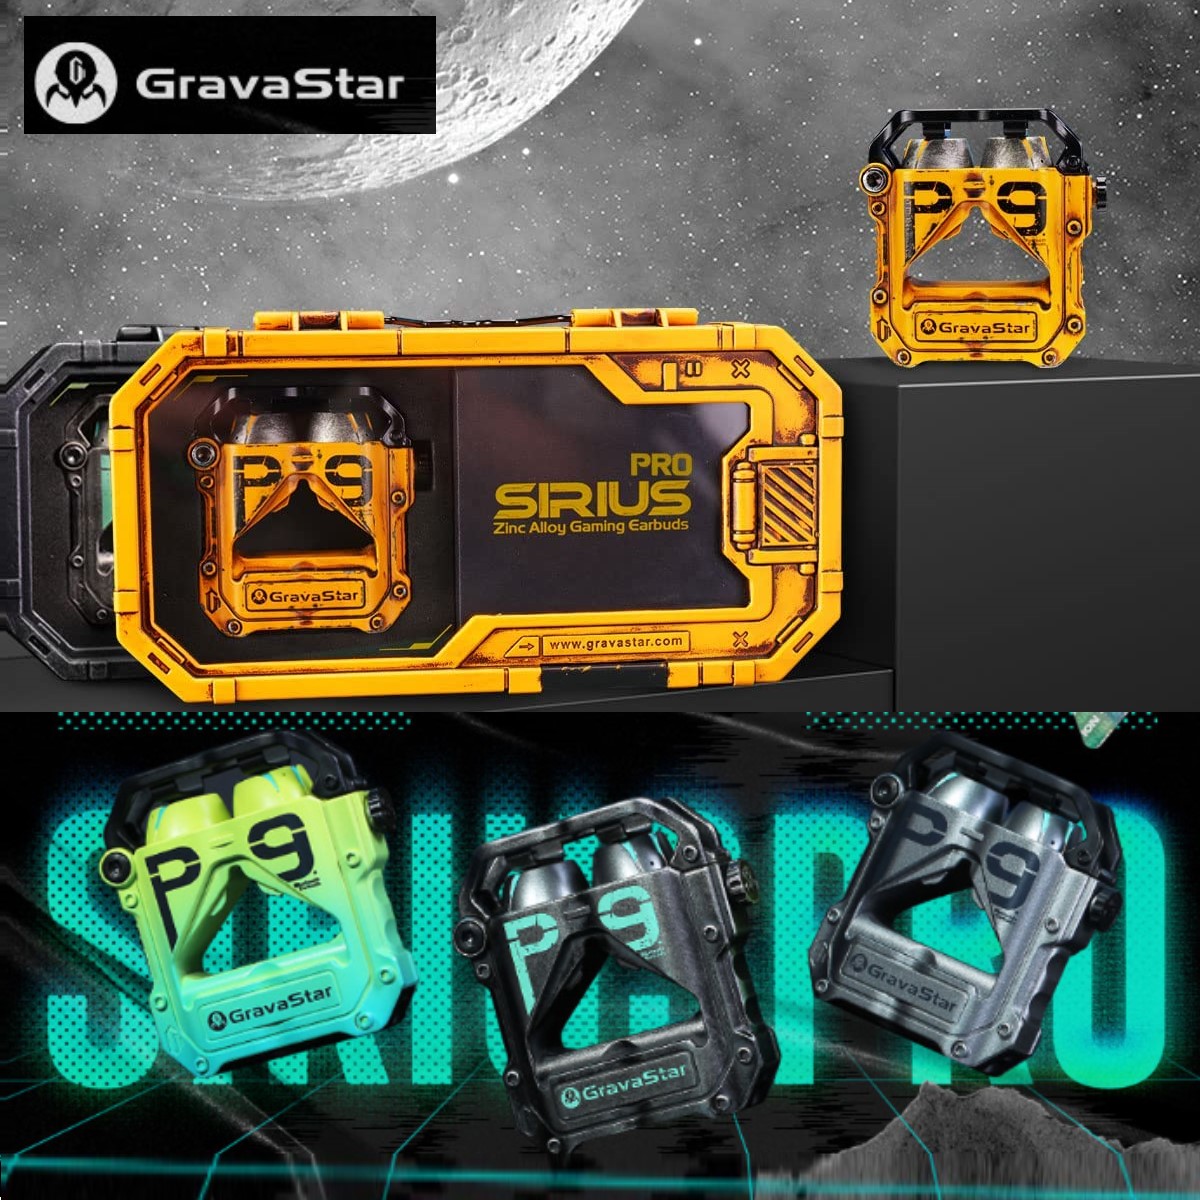 gravastar latest products now in Malaysia